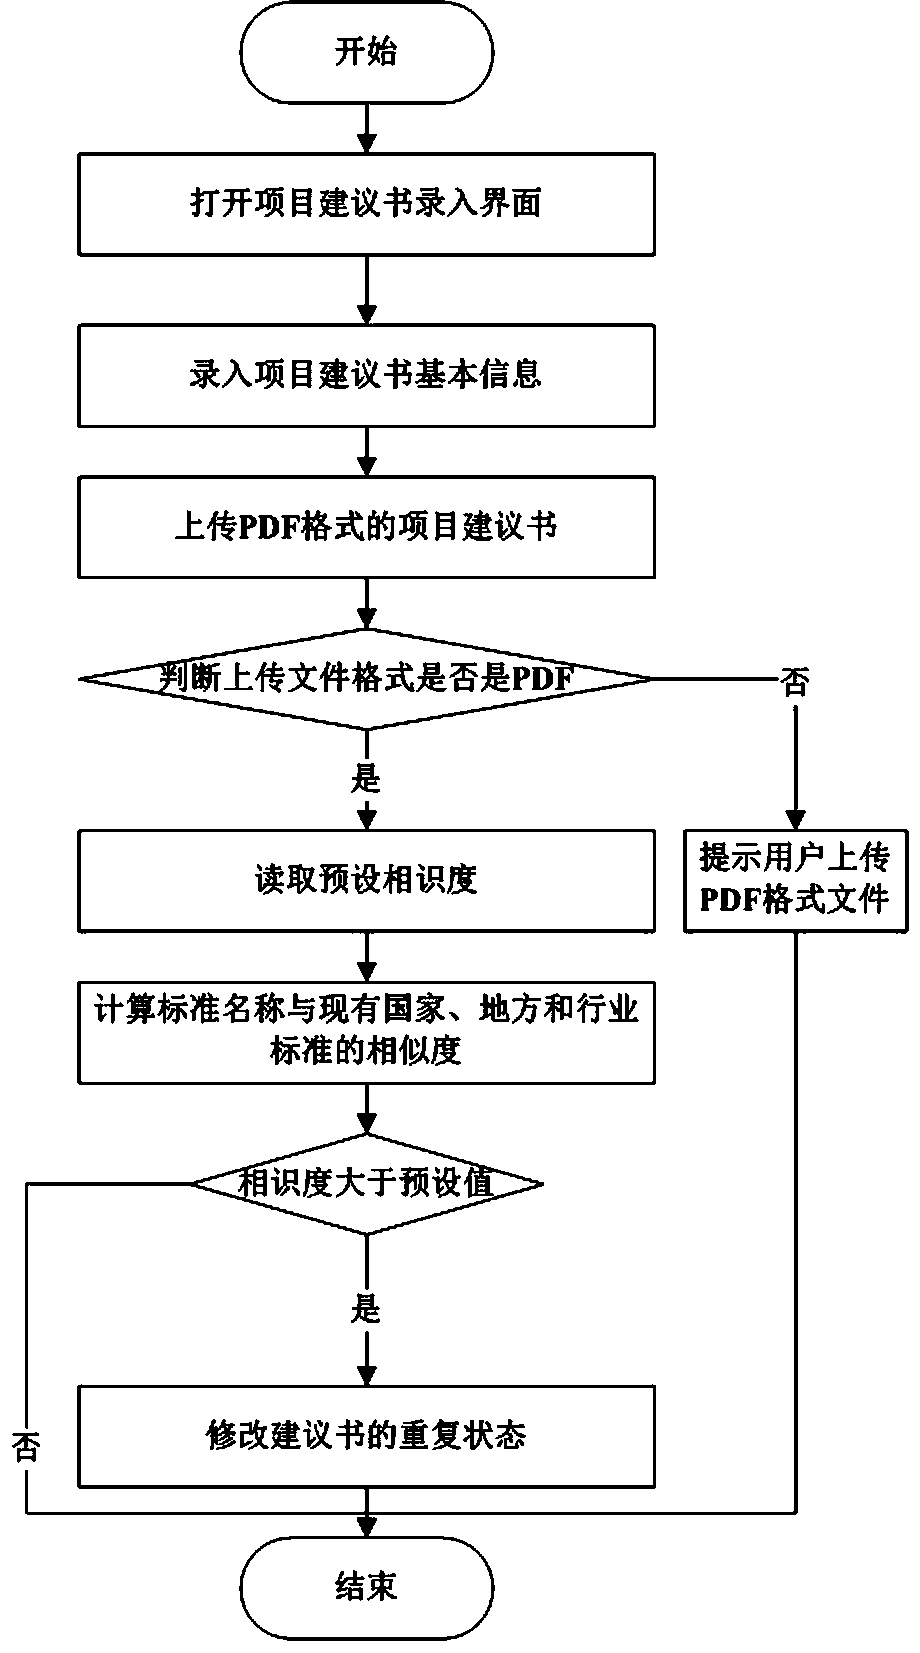 Information management platform, application and method thereof